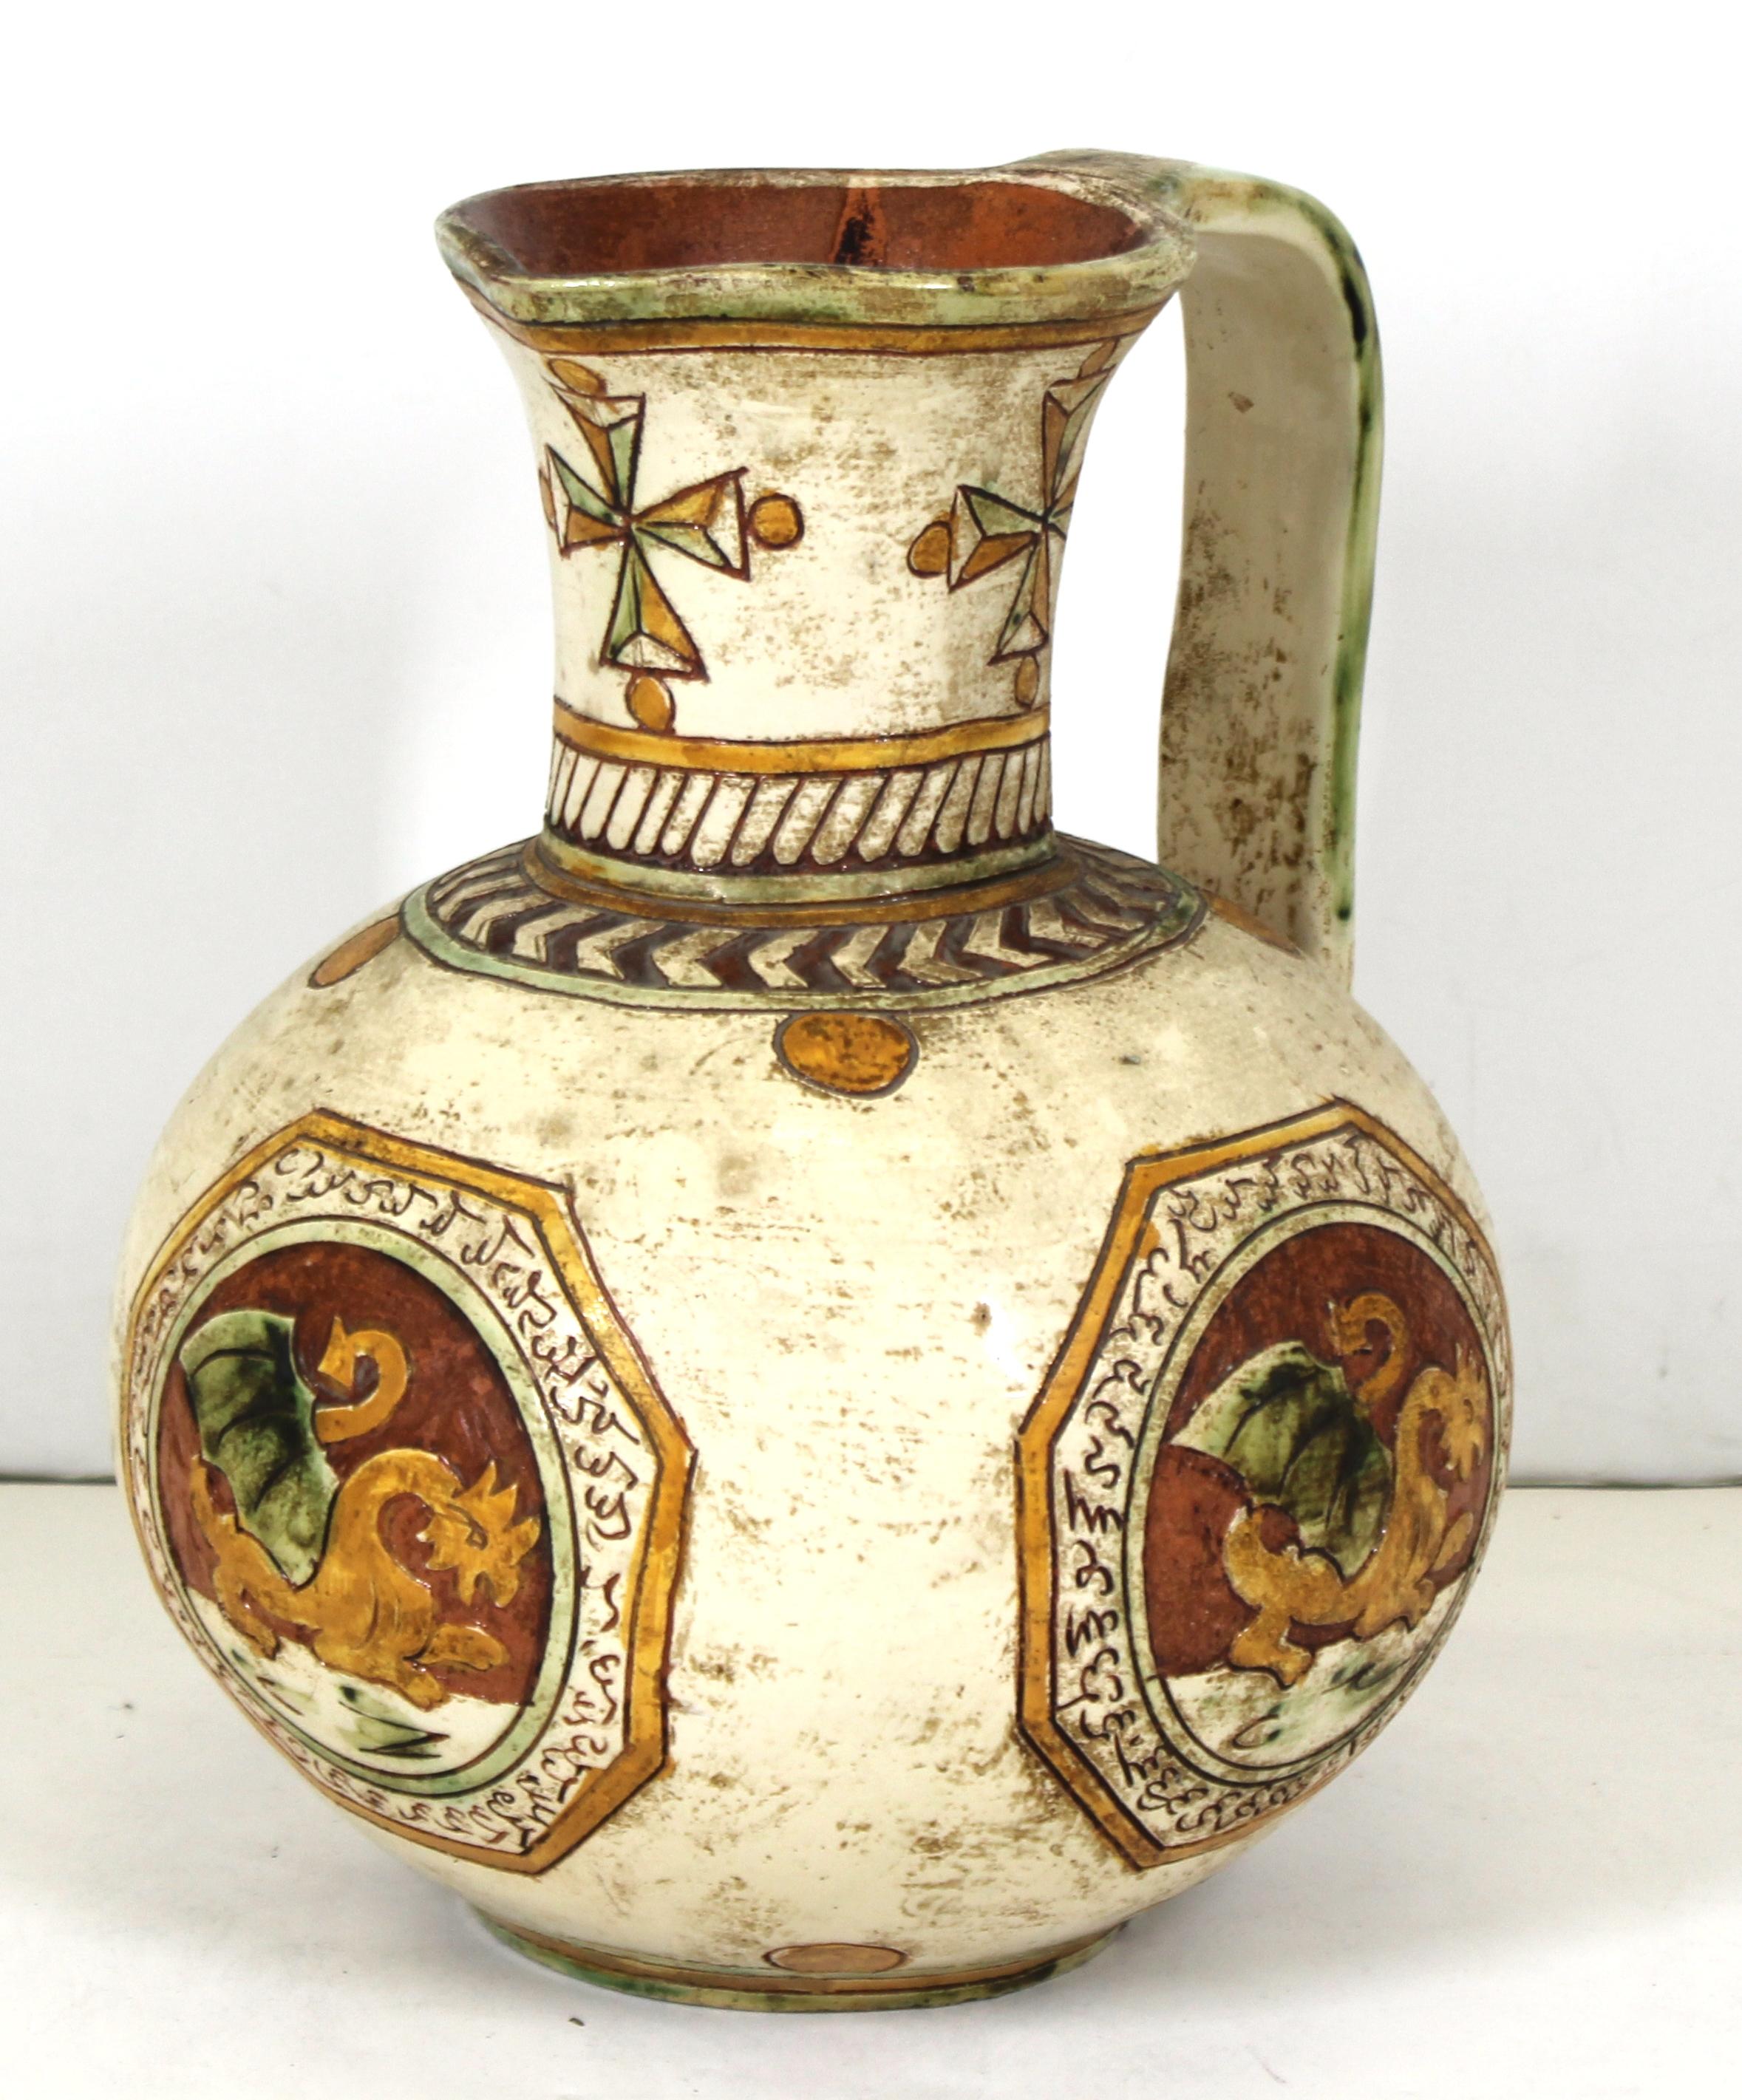 Early 20th Century Italian Renaissance Revival Sgraffito Ceramic Pitcher with Dragon Motif For Sale